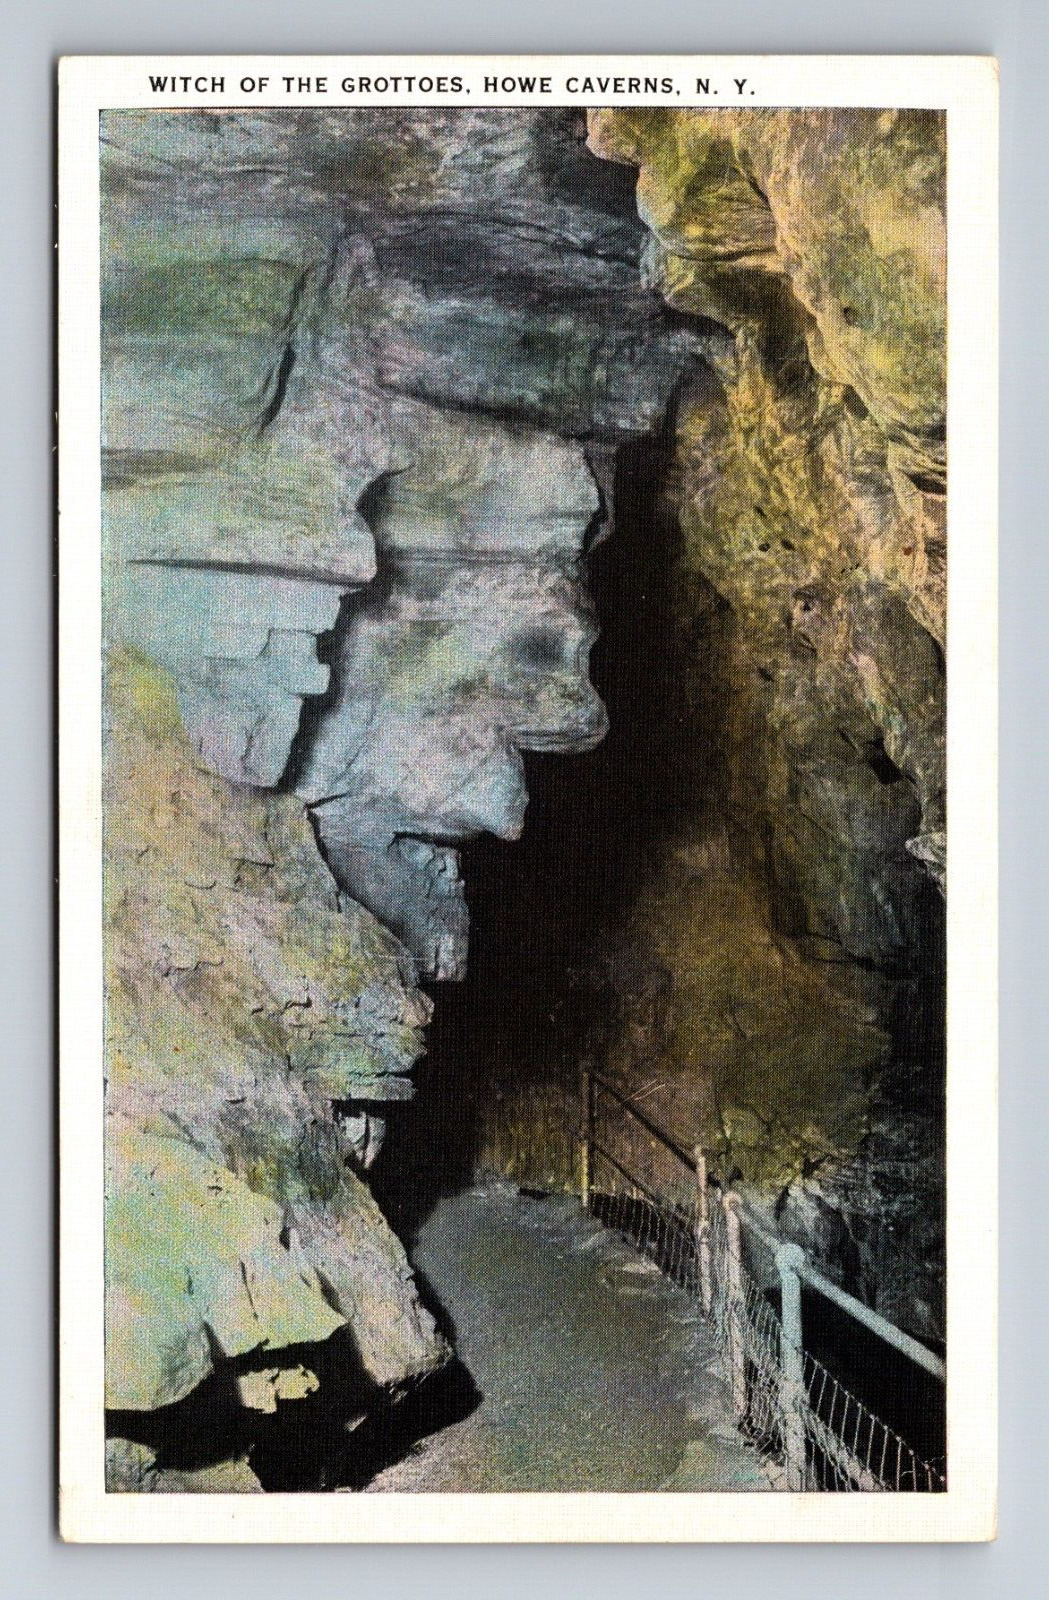 Witch of the Grottoes Rock Formations Howe Caverns NY Postcard